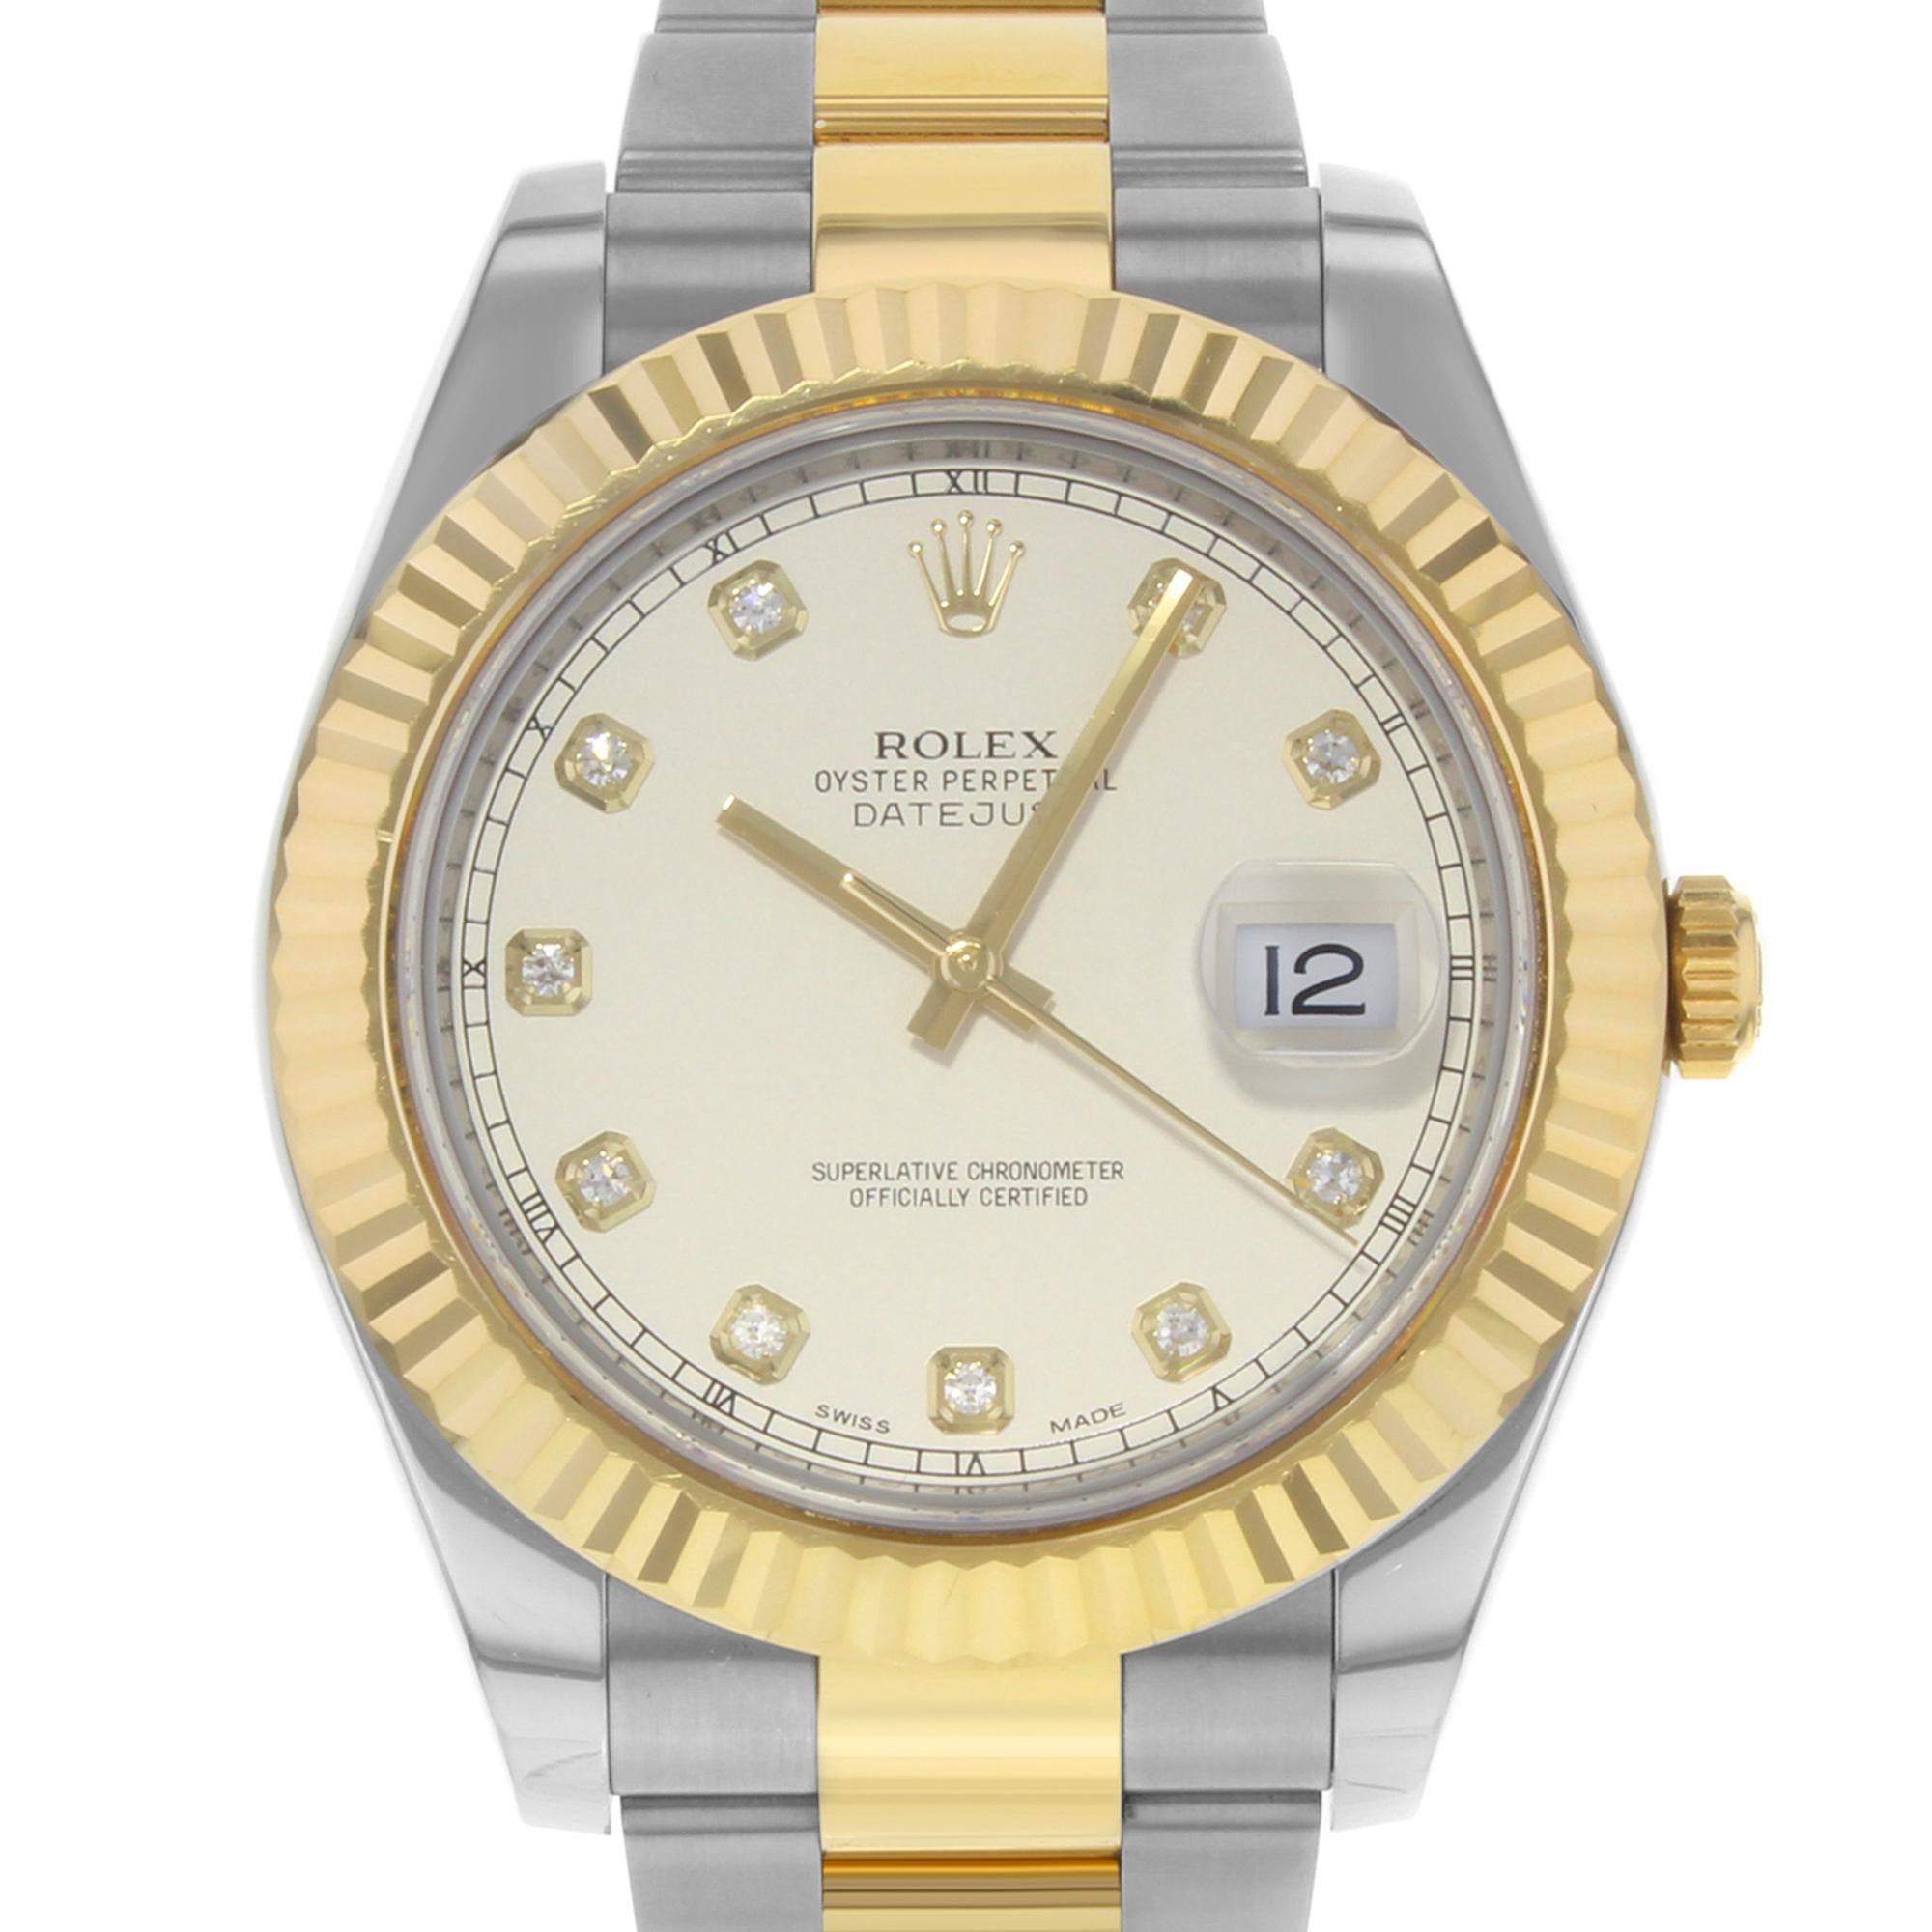 Pre-owned. Good condition. Beautiful dial. 2012 card. Comes with a box and papers.

Brand: Rolex
Model Number: 116333 ido
Department: Men
Country/Region of Manufacture: Switzerland
Style: Luxury
Model Name: Rolex Datejust II
Vintage: